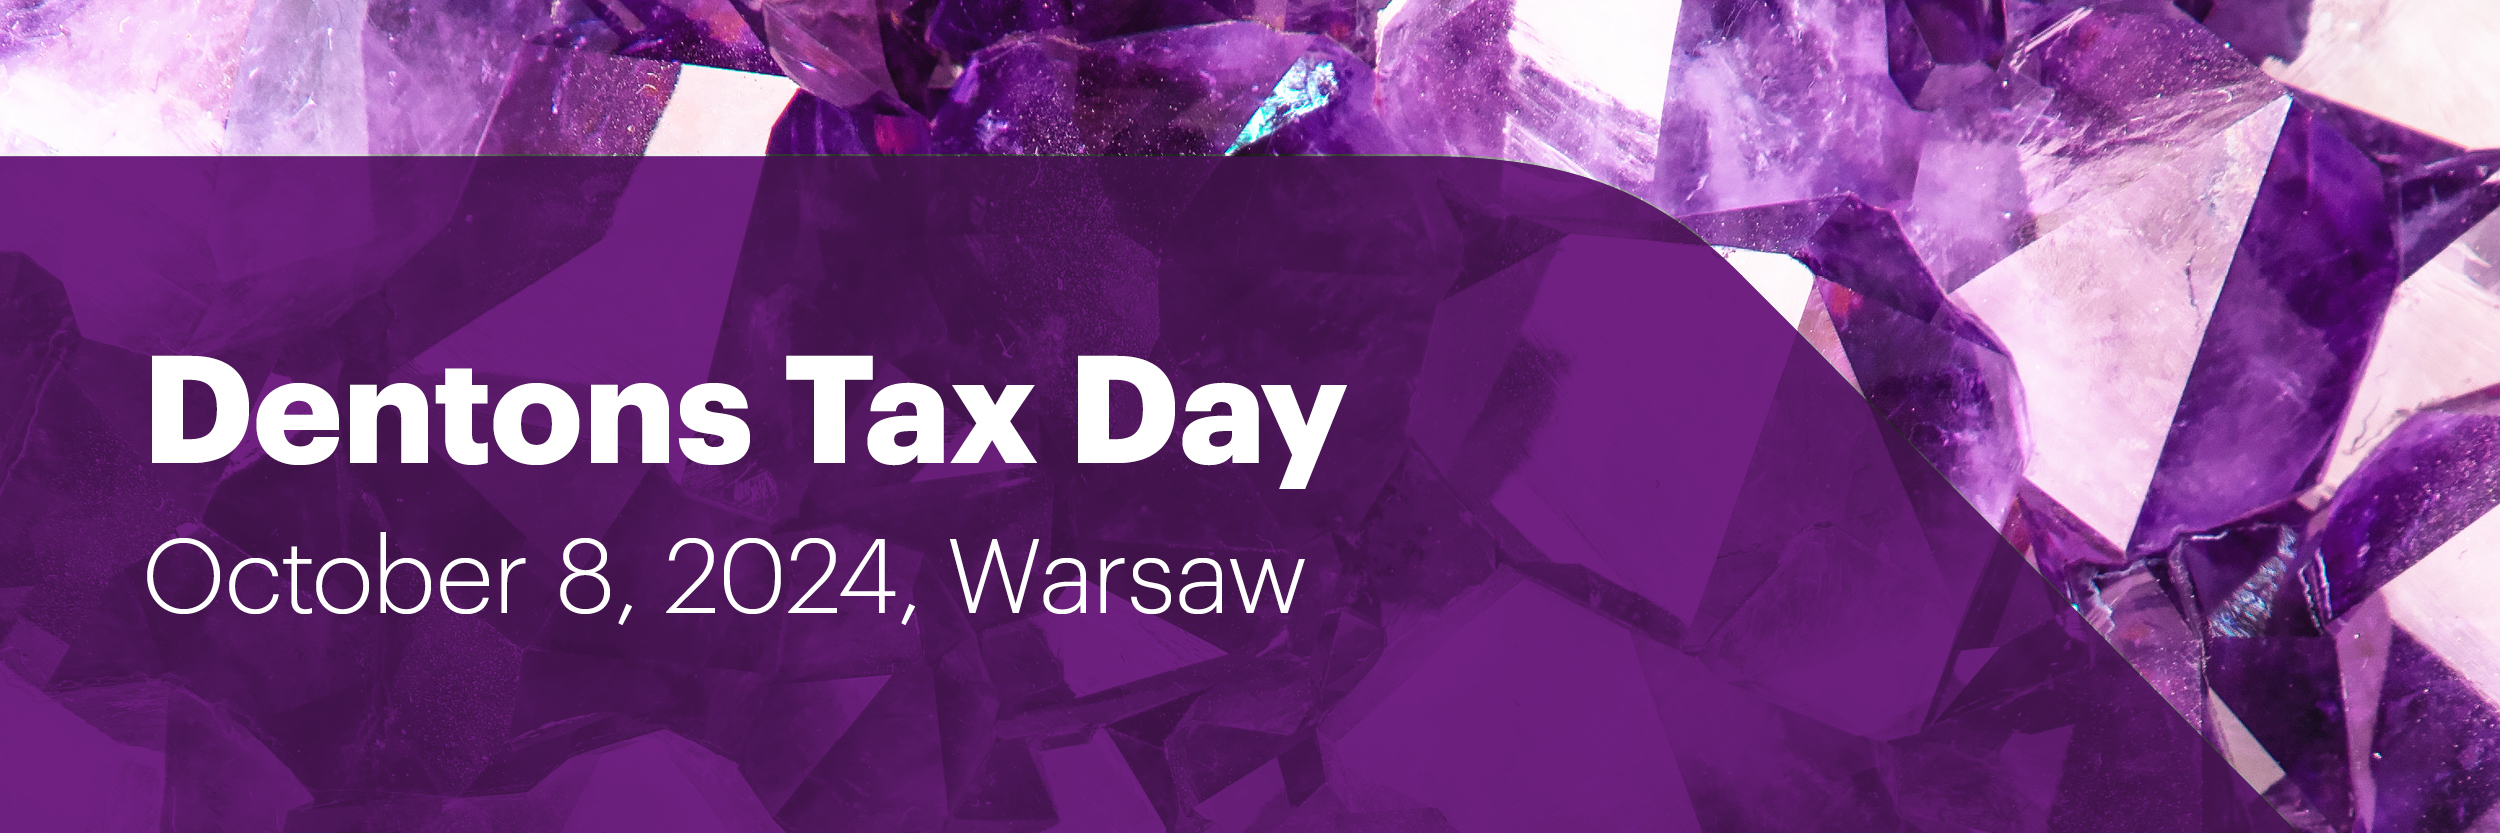 Dentons Tax Day banner